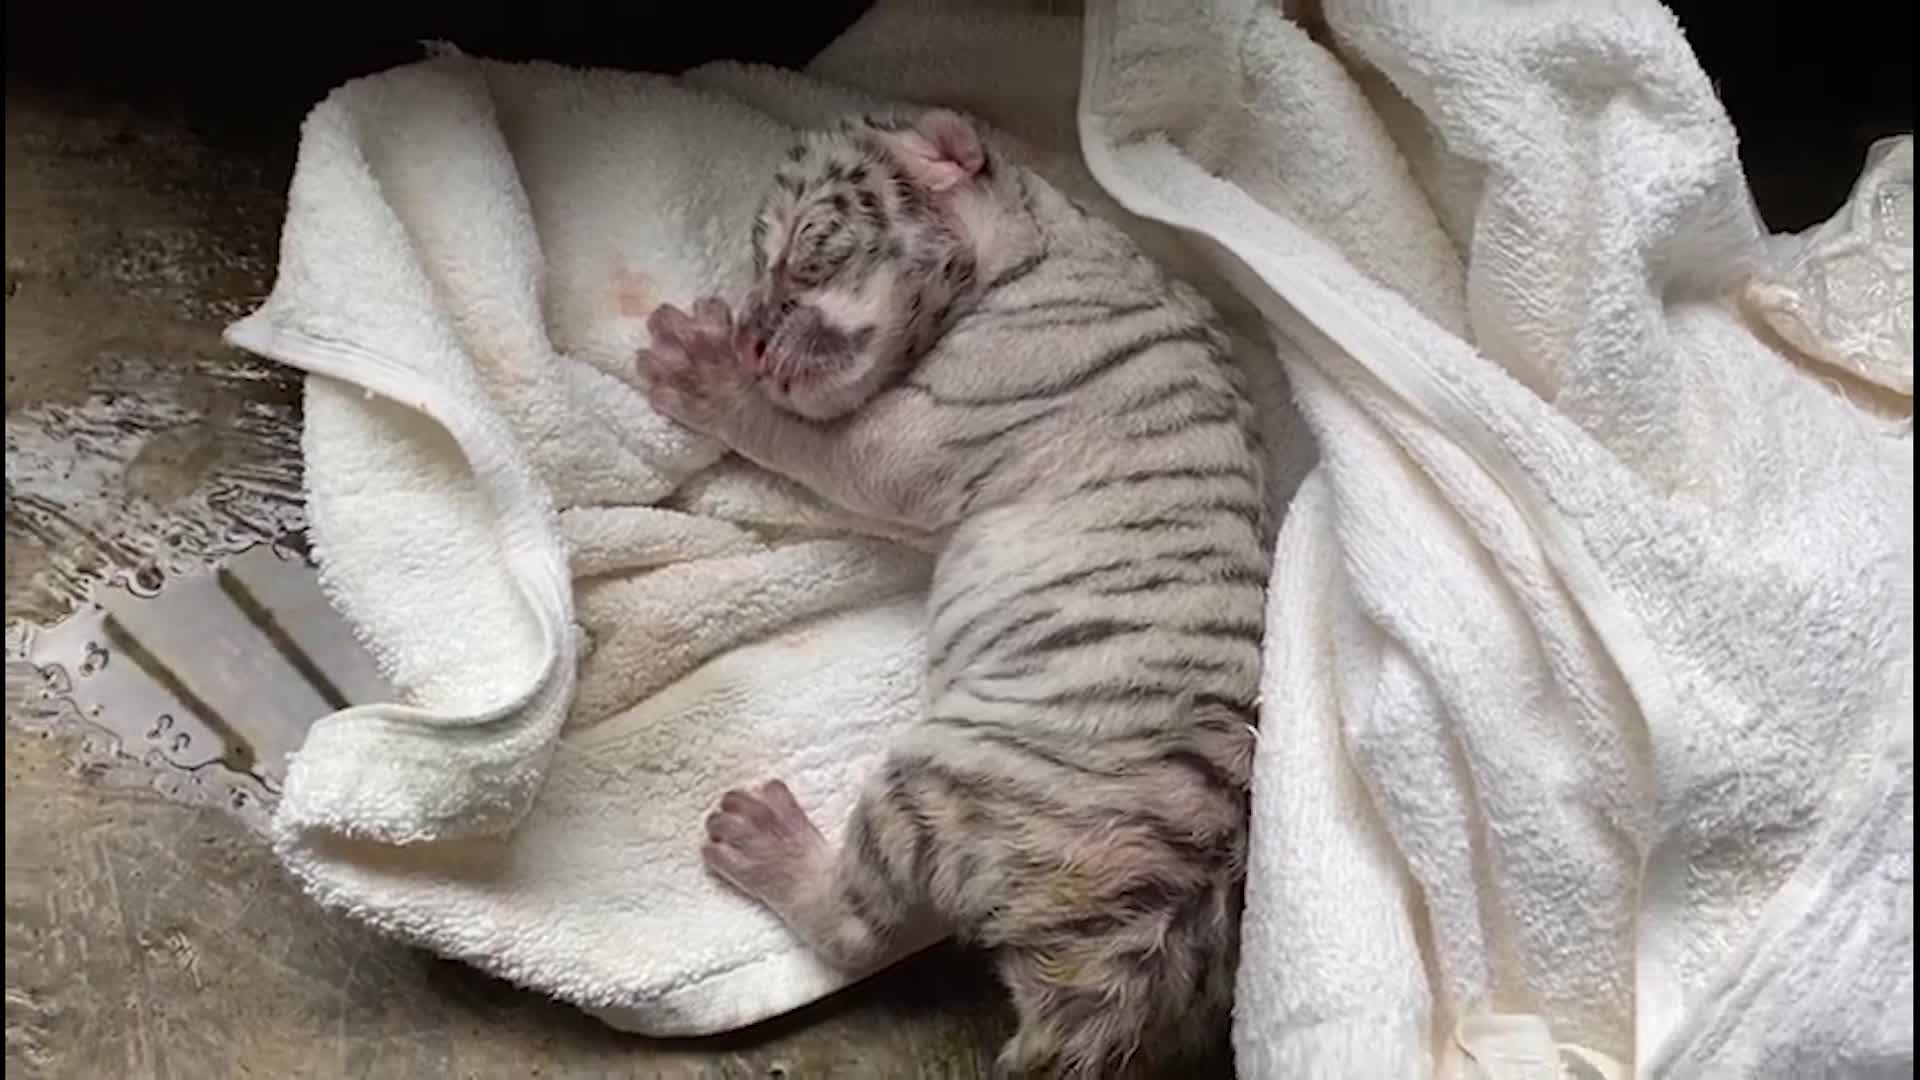 Nieve, the first white tiger to breed in Central America